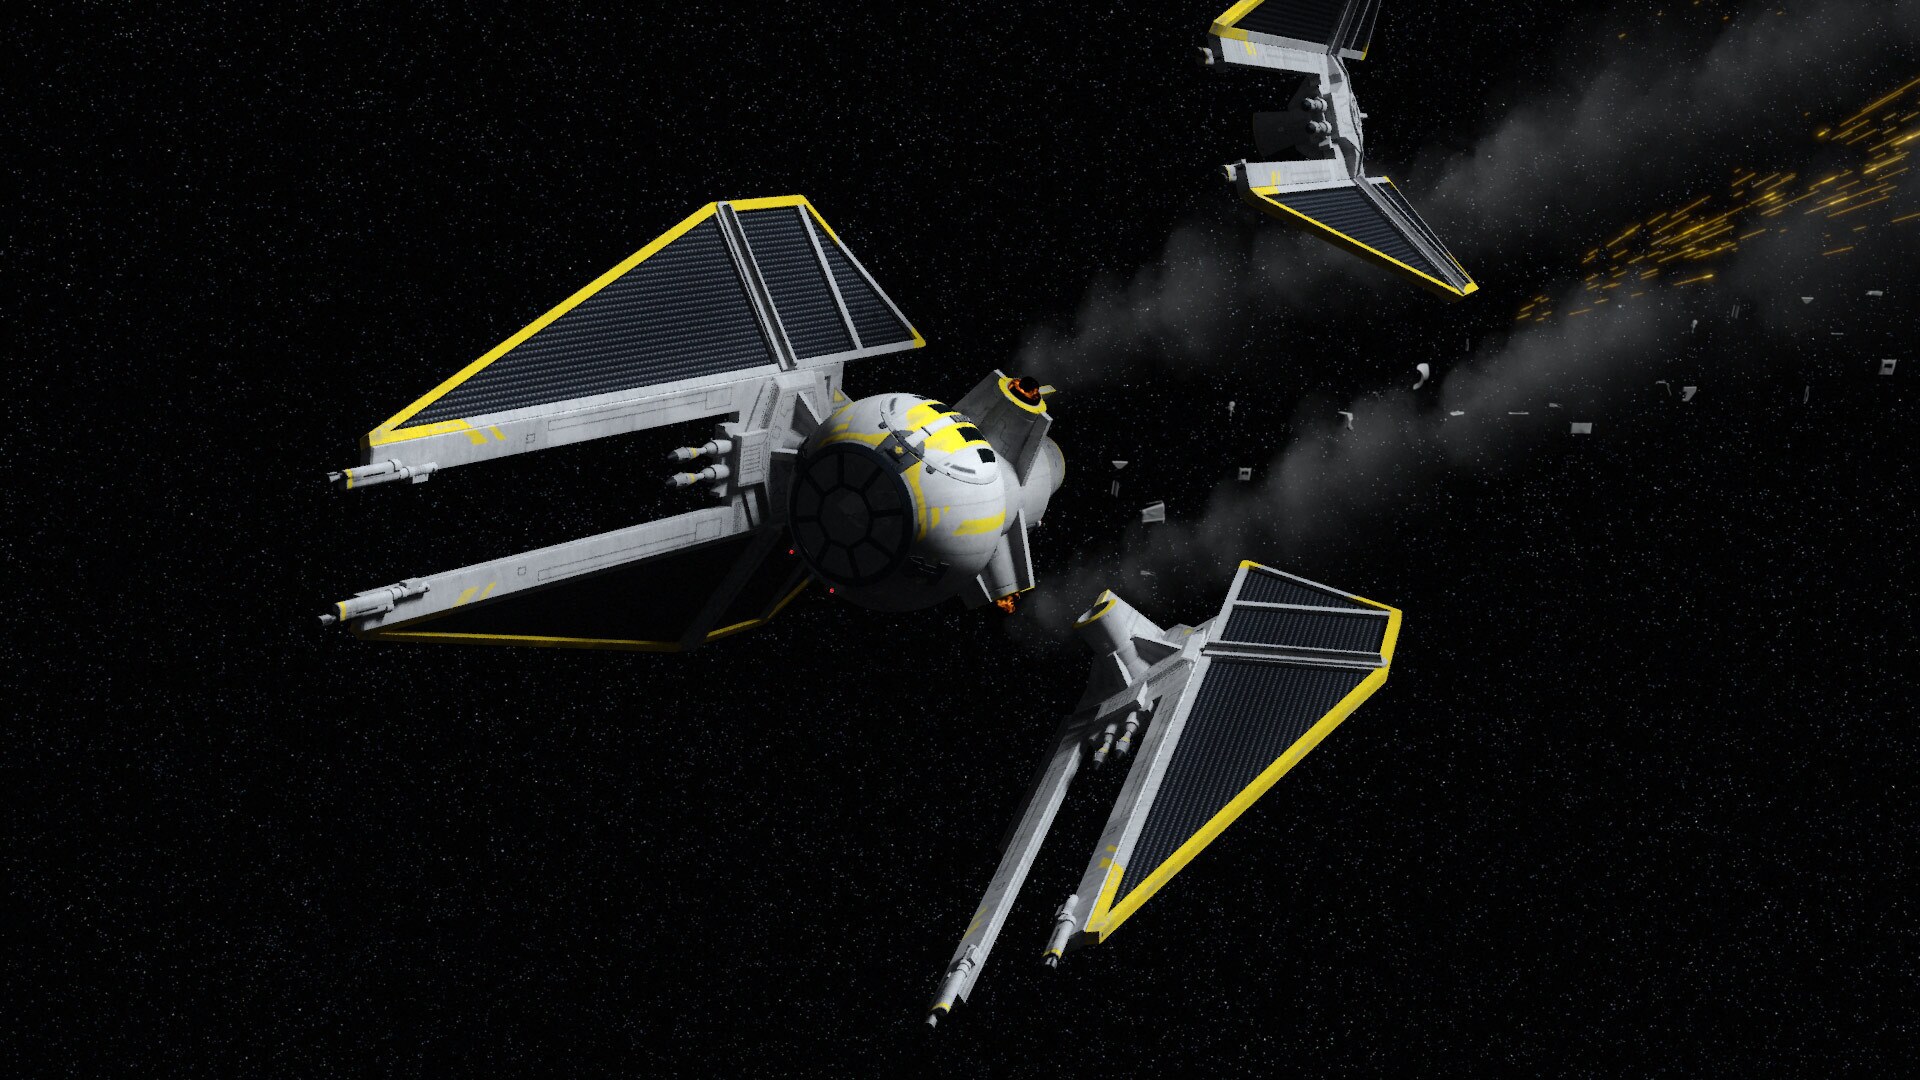 It would prove a costly mistake, as Hera outmaneuvers her rival and destroys the TIE defender elite.